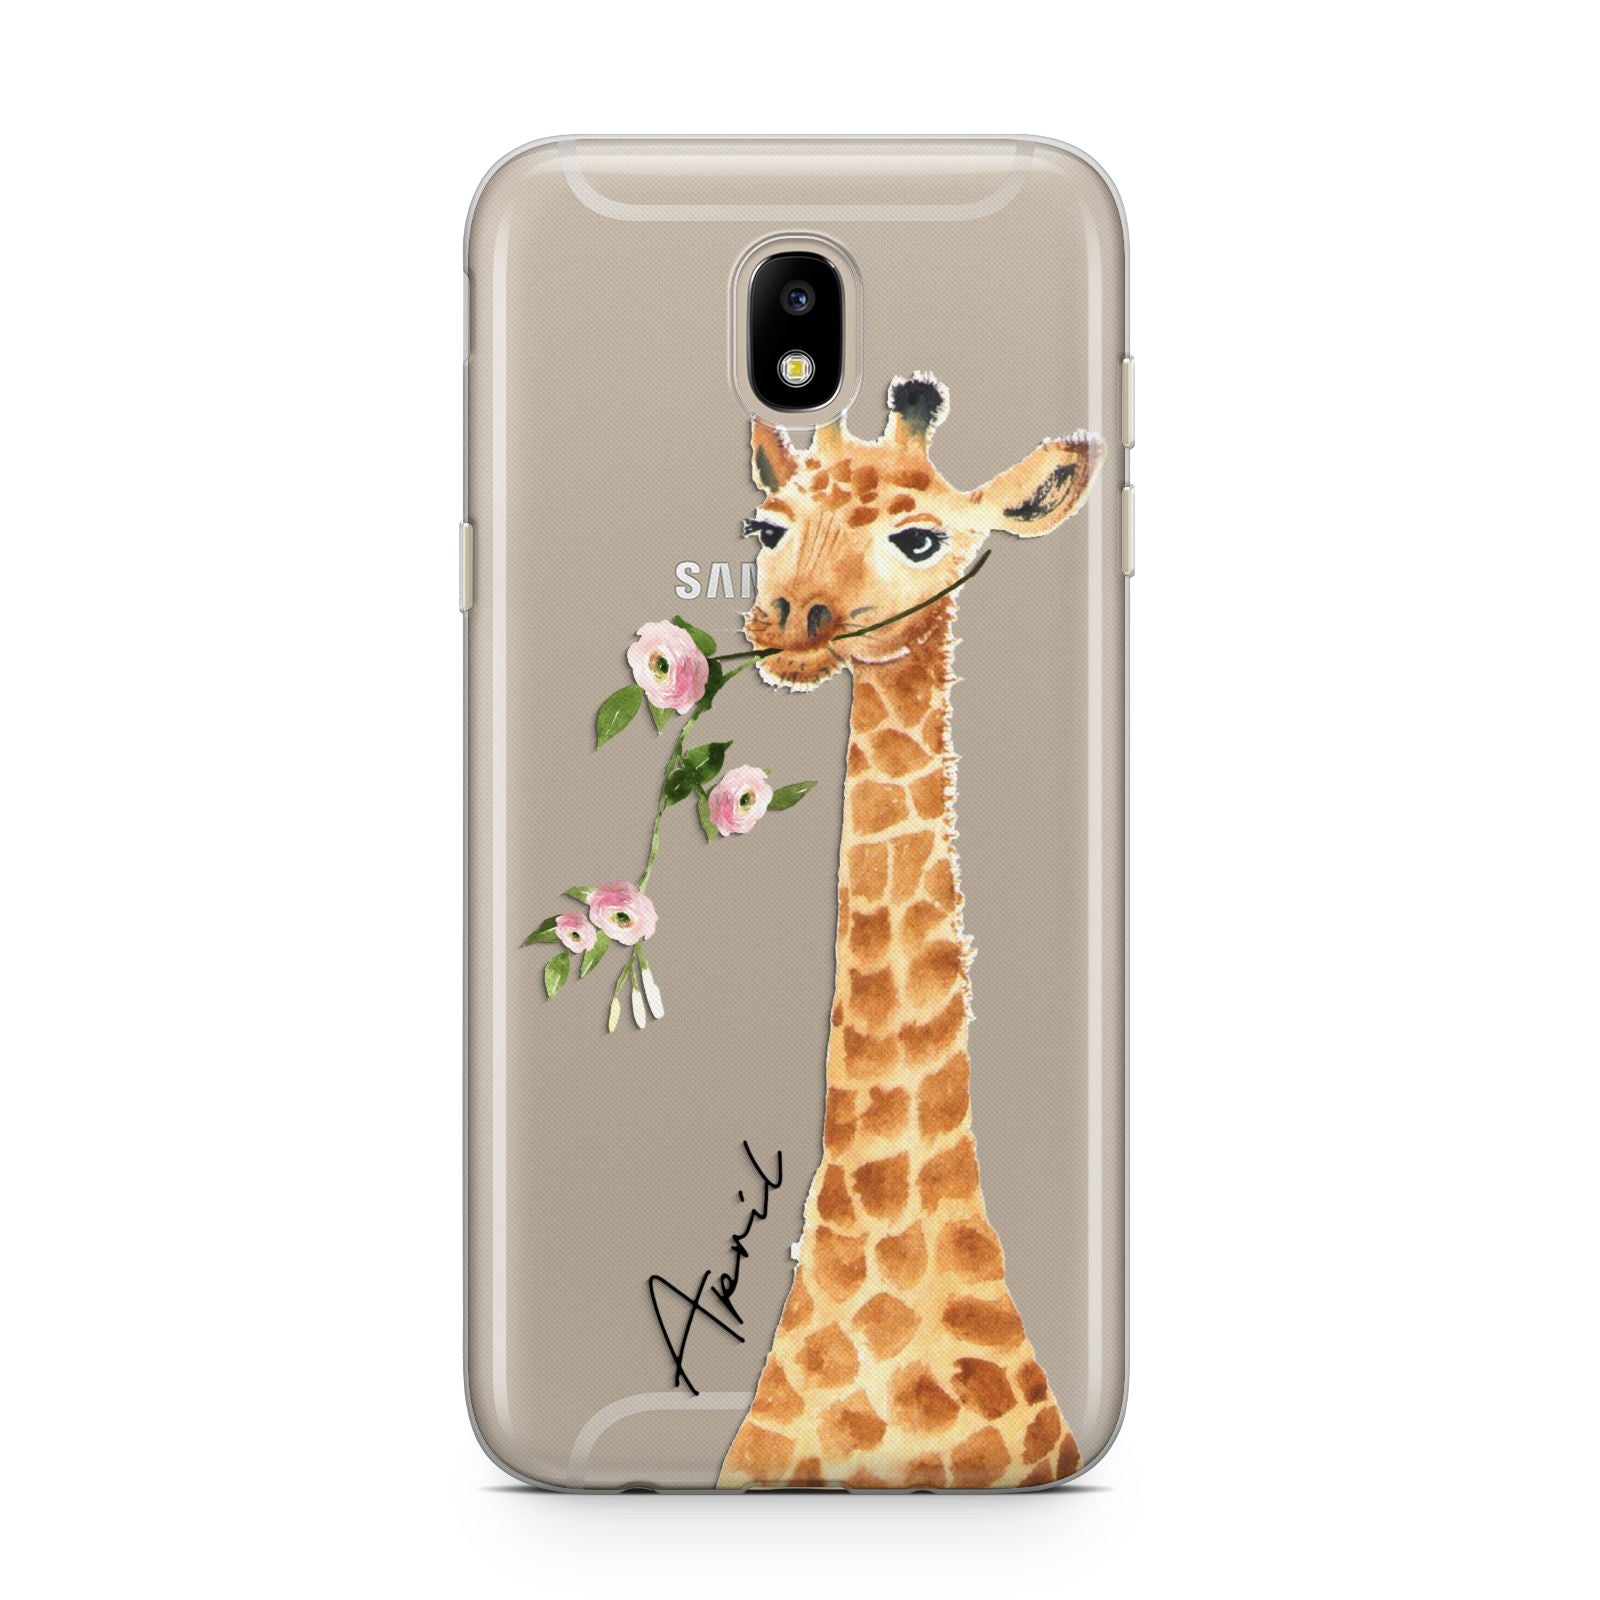 Personalised Giraffe with Name Samsung J5 2017 Case